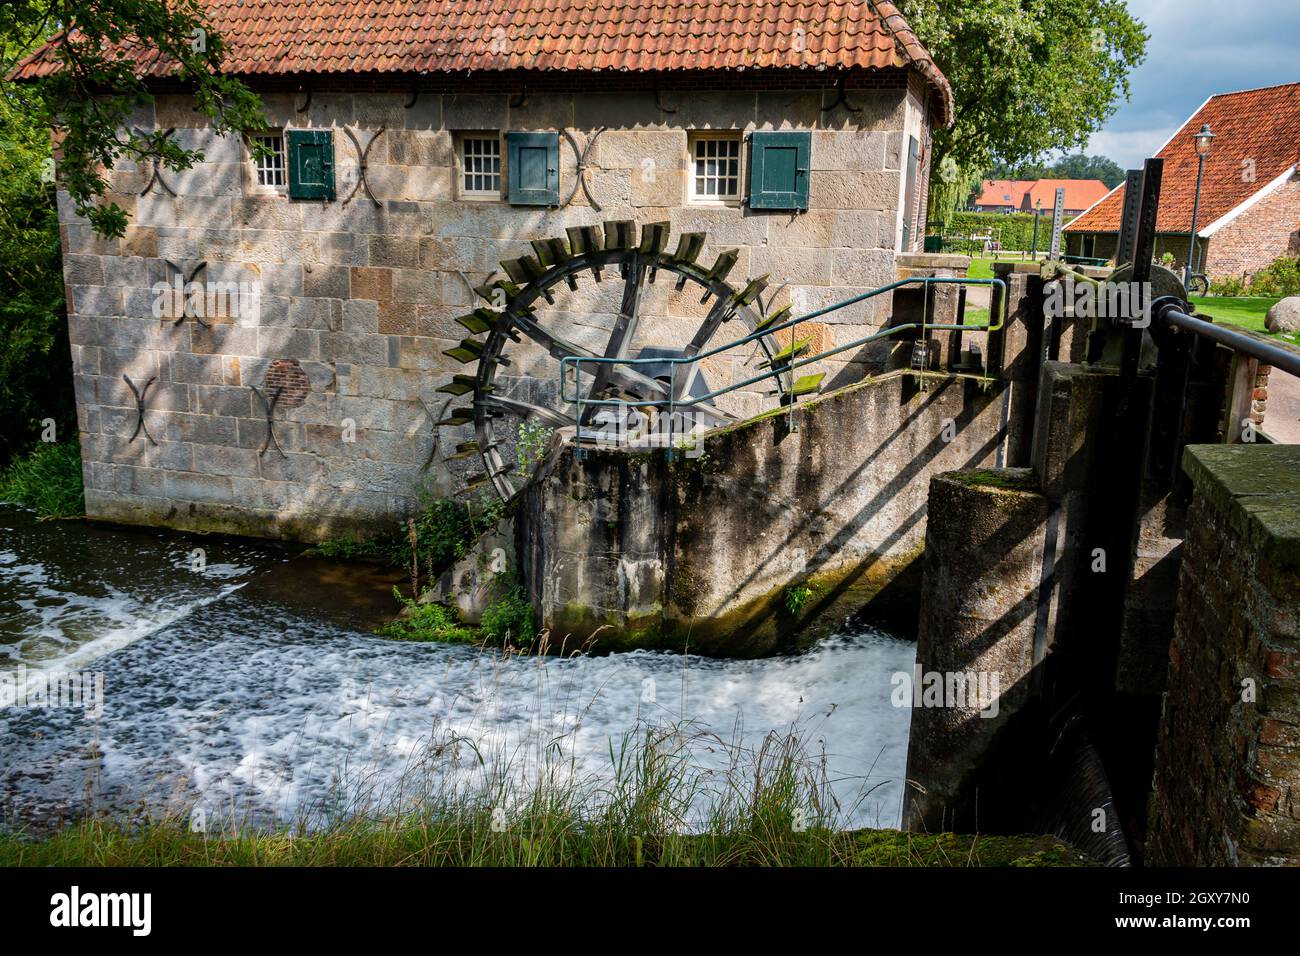 The old water mill named 'Mallumse mill', for processing corn and oil, near the village of Eibergen in the region 'Achterhoek', province of Gelderland Stock Photo